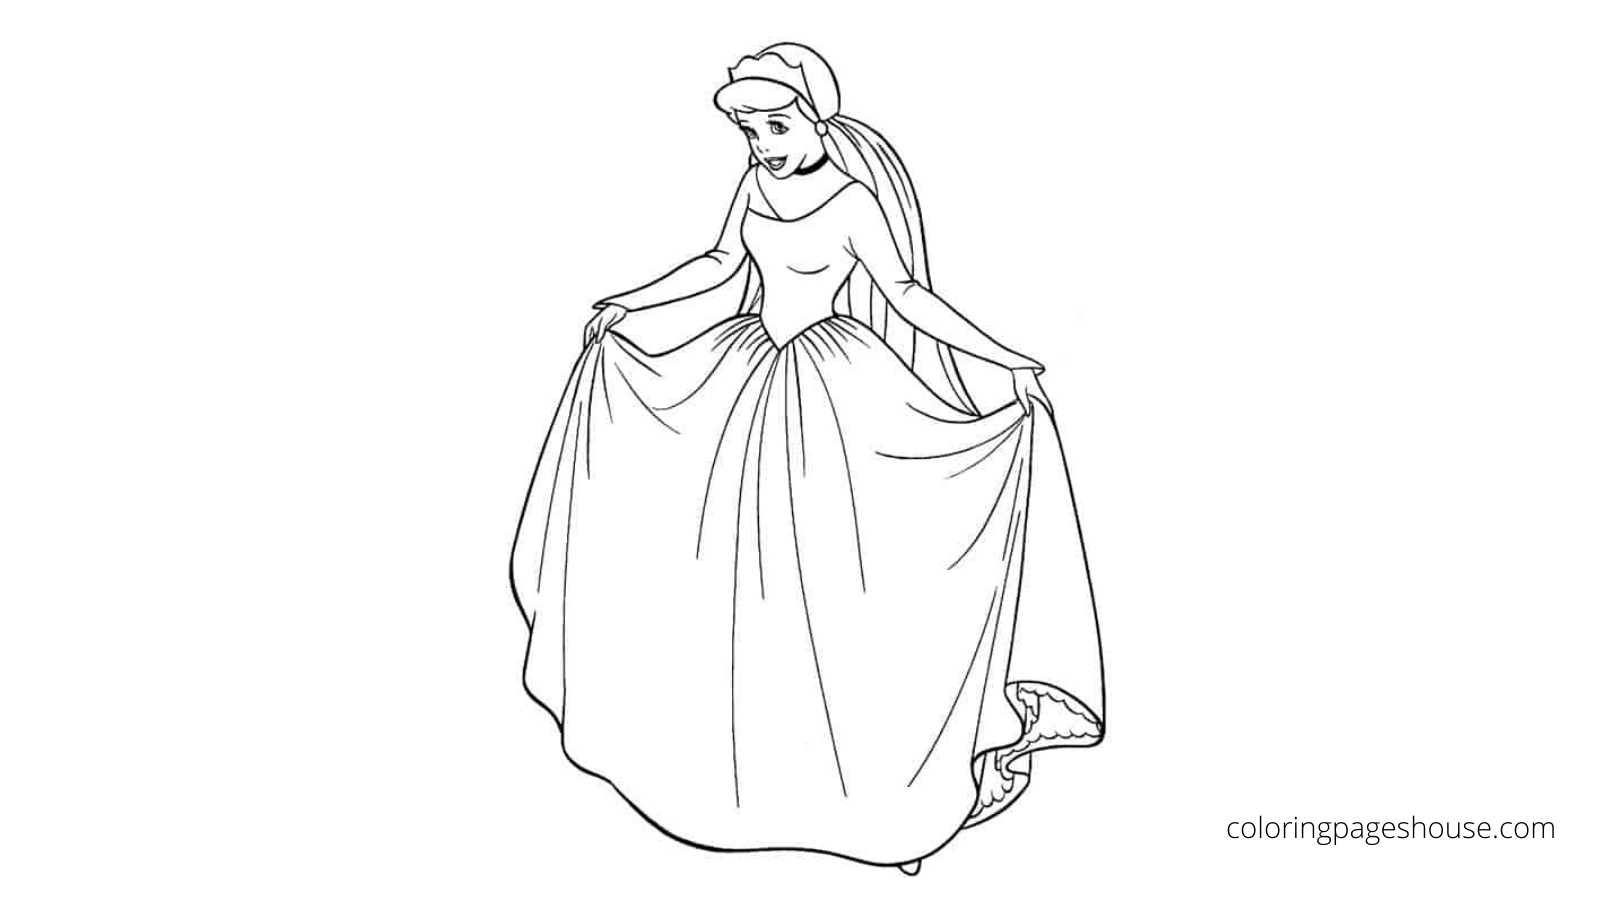 Techno gamer on x cinderella in wedding dress coloring page follow us to get more free printable coloring pages httpstcoraguvlyxt coloring coloringbook coloringpages printable coloringpagesforadults coloringpagesforkids coloringbook